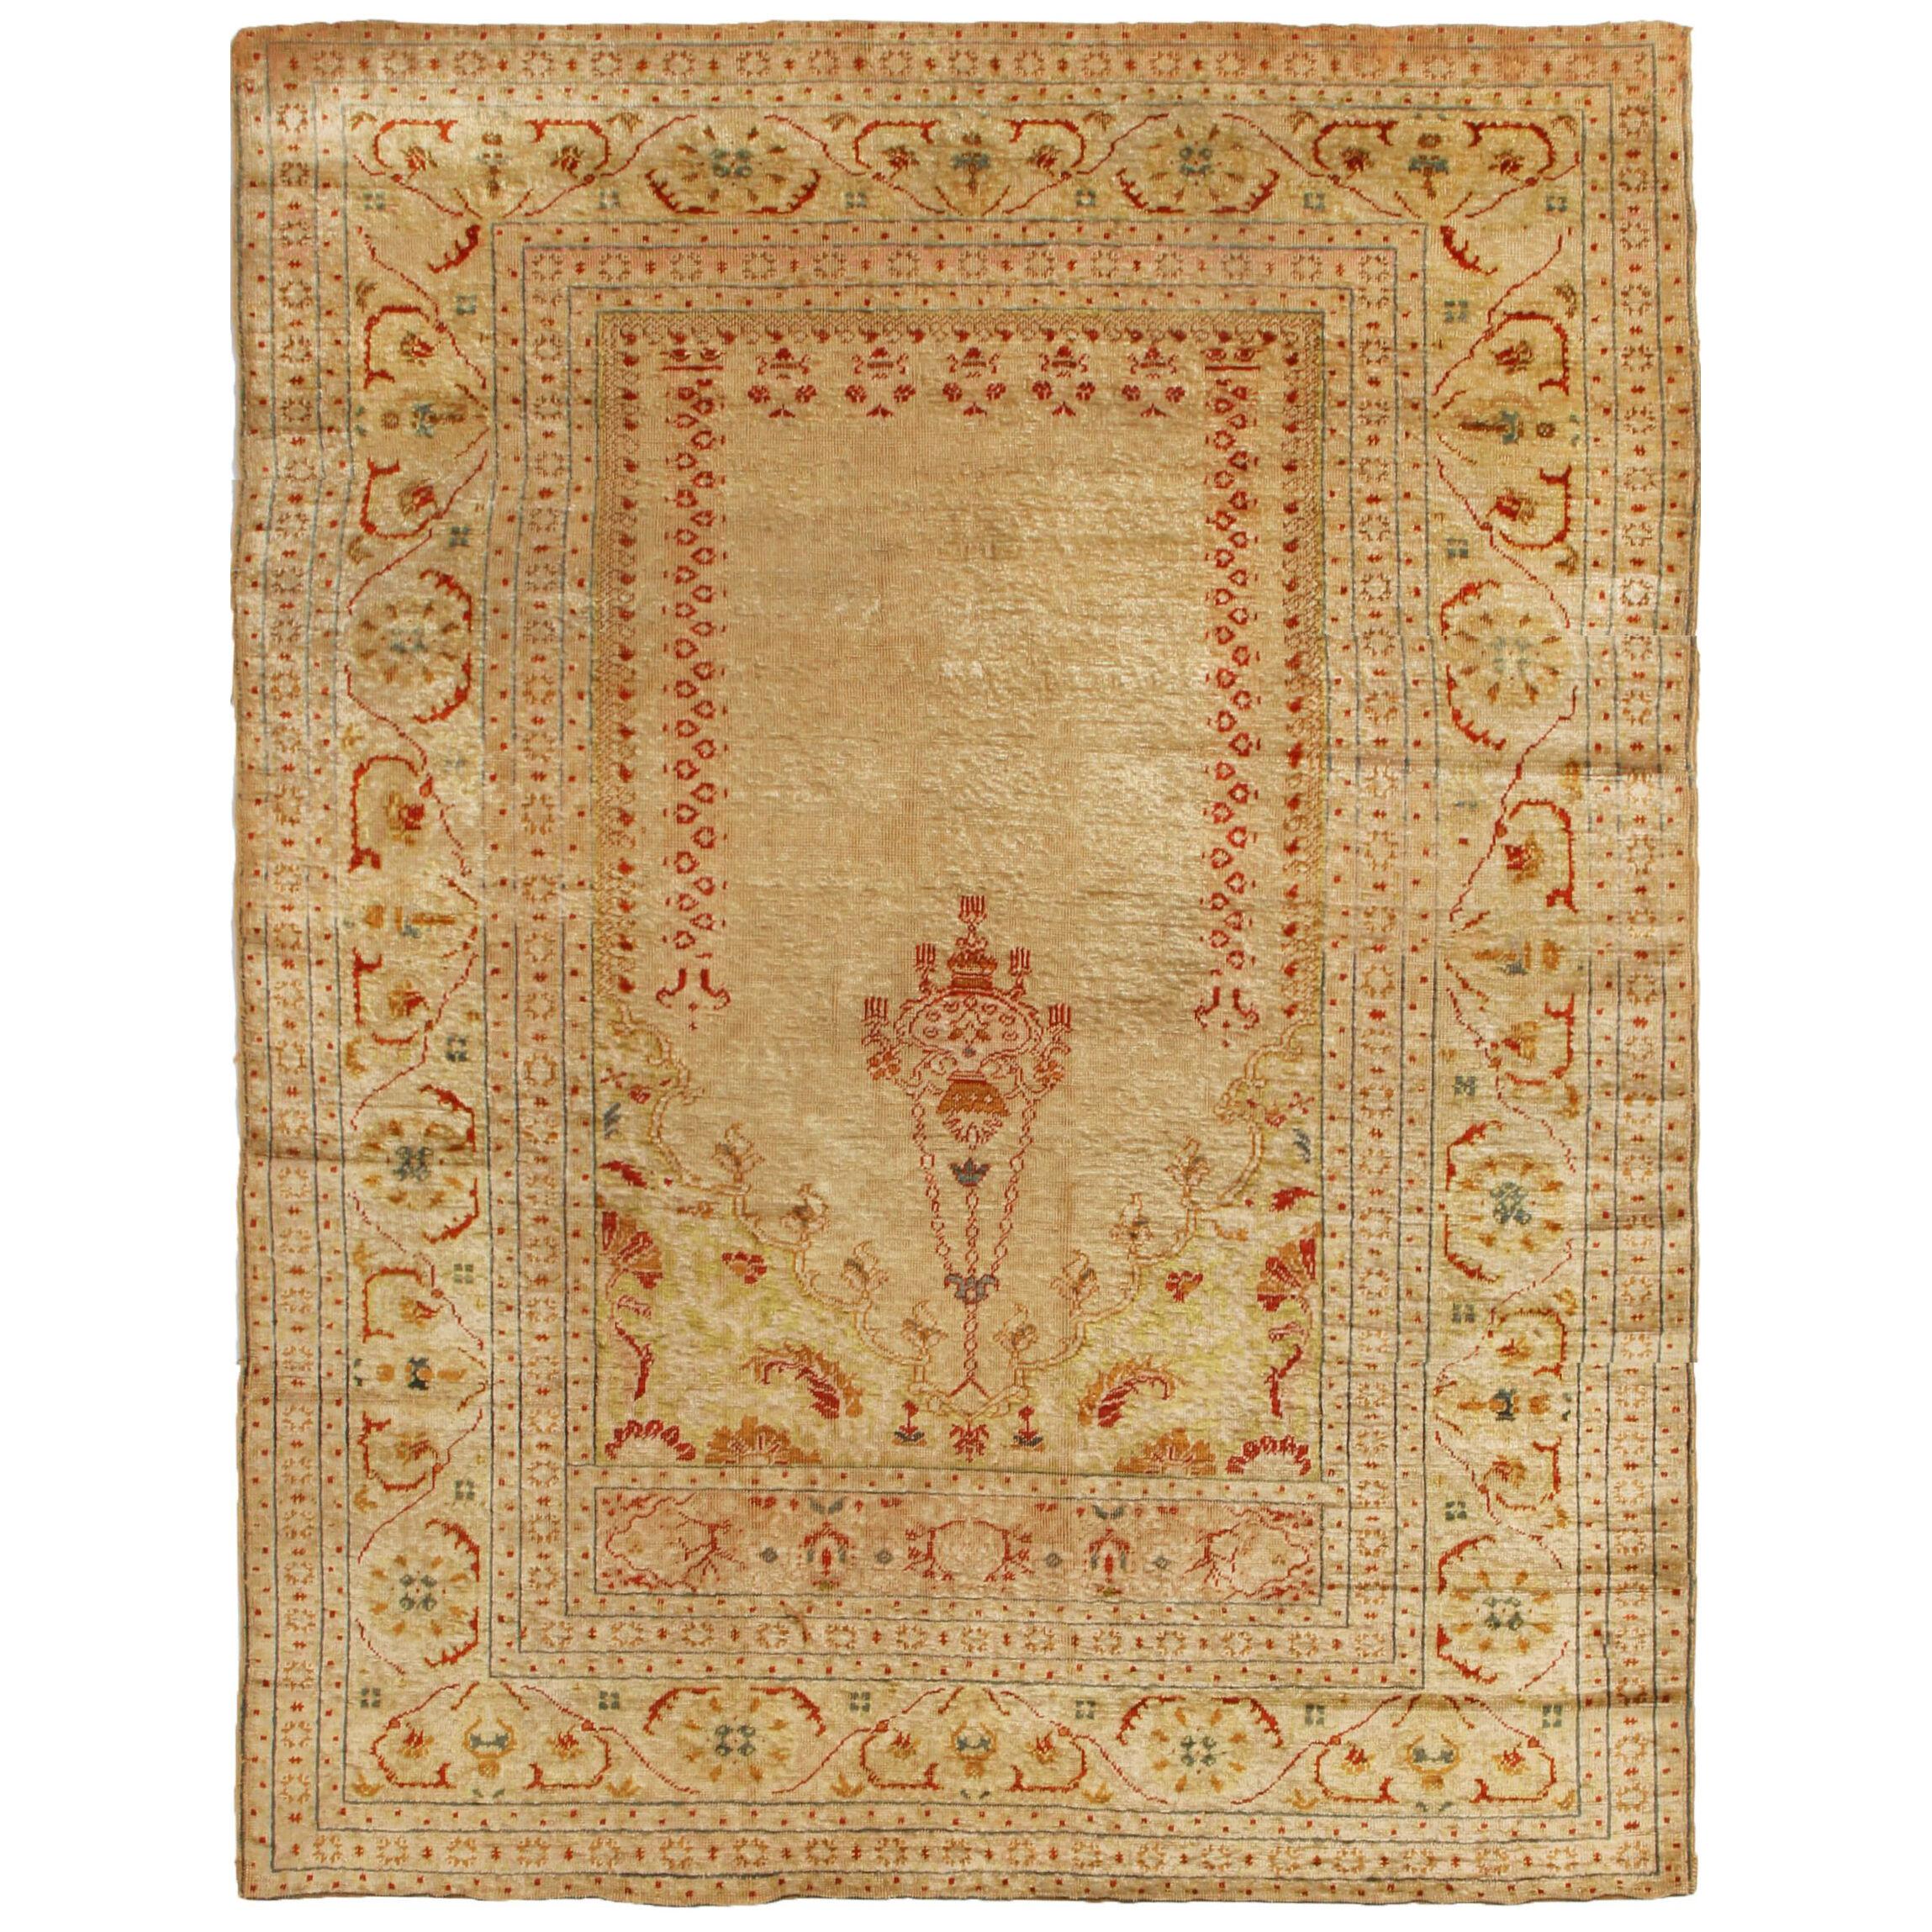 Antique Tabriz Beige and Red Persian Wool Rug